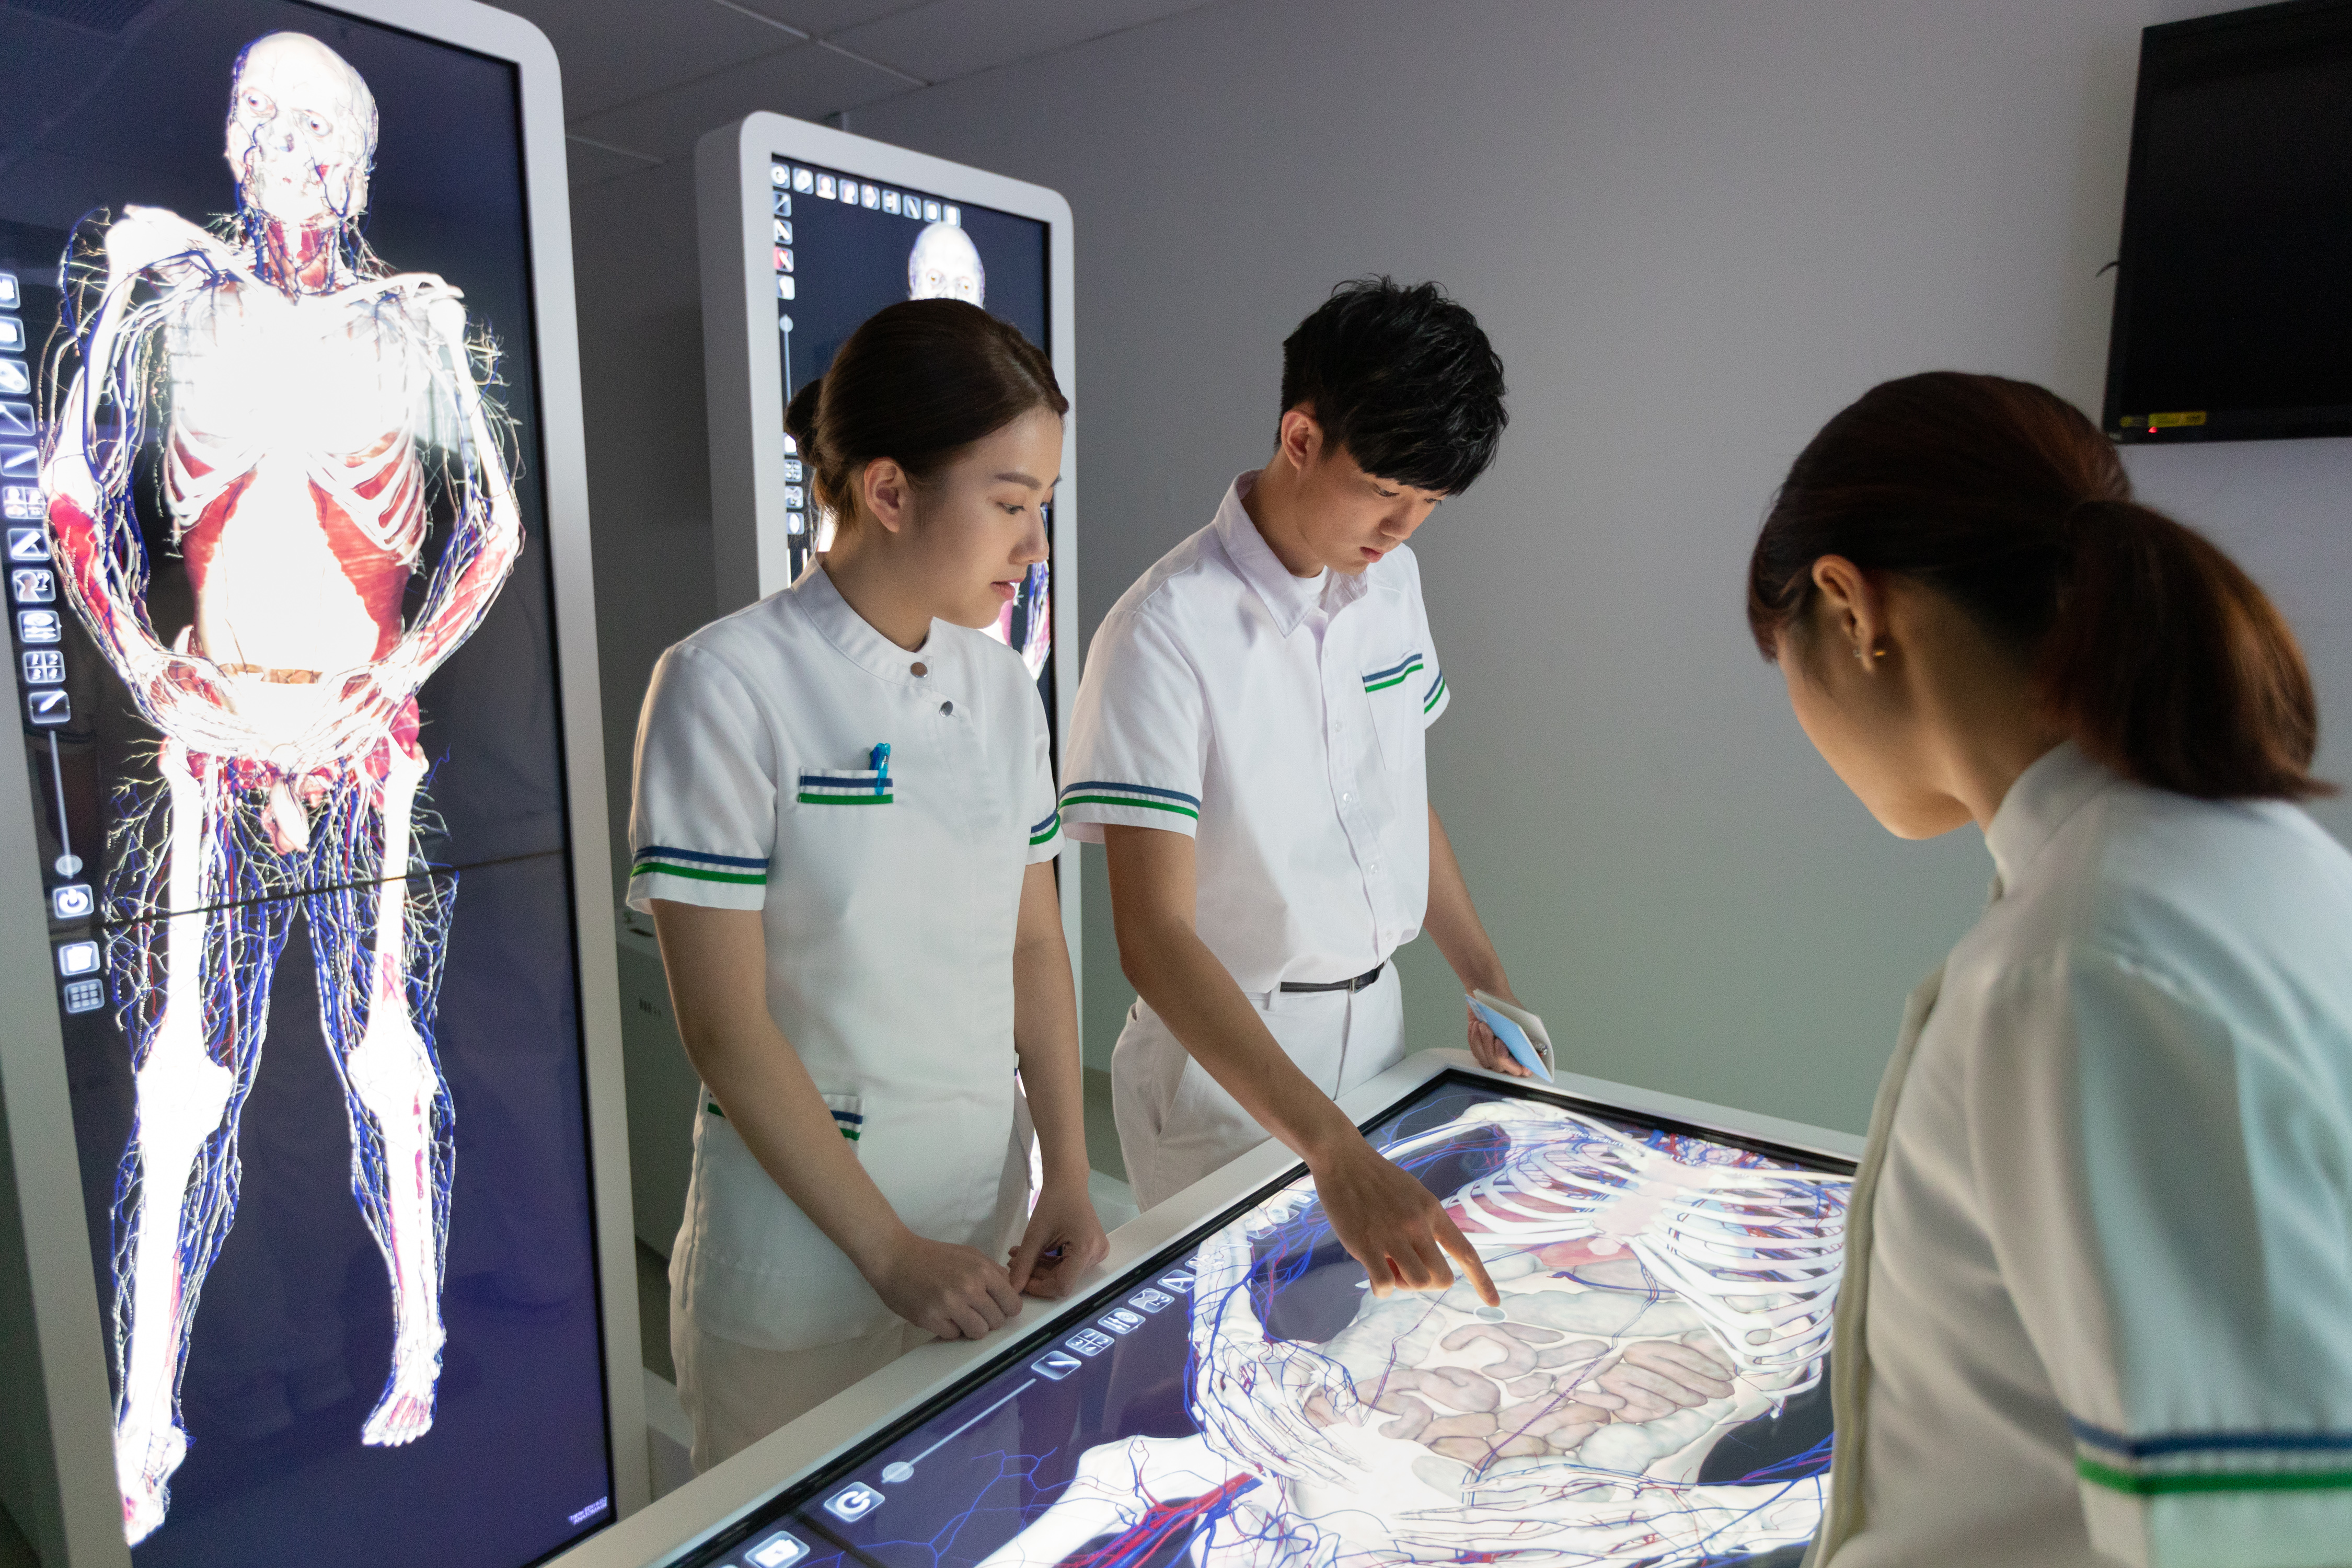 The Digital Virtual Dissection System displays the human body structure at a 1:1 ratio. 